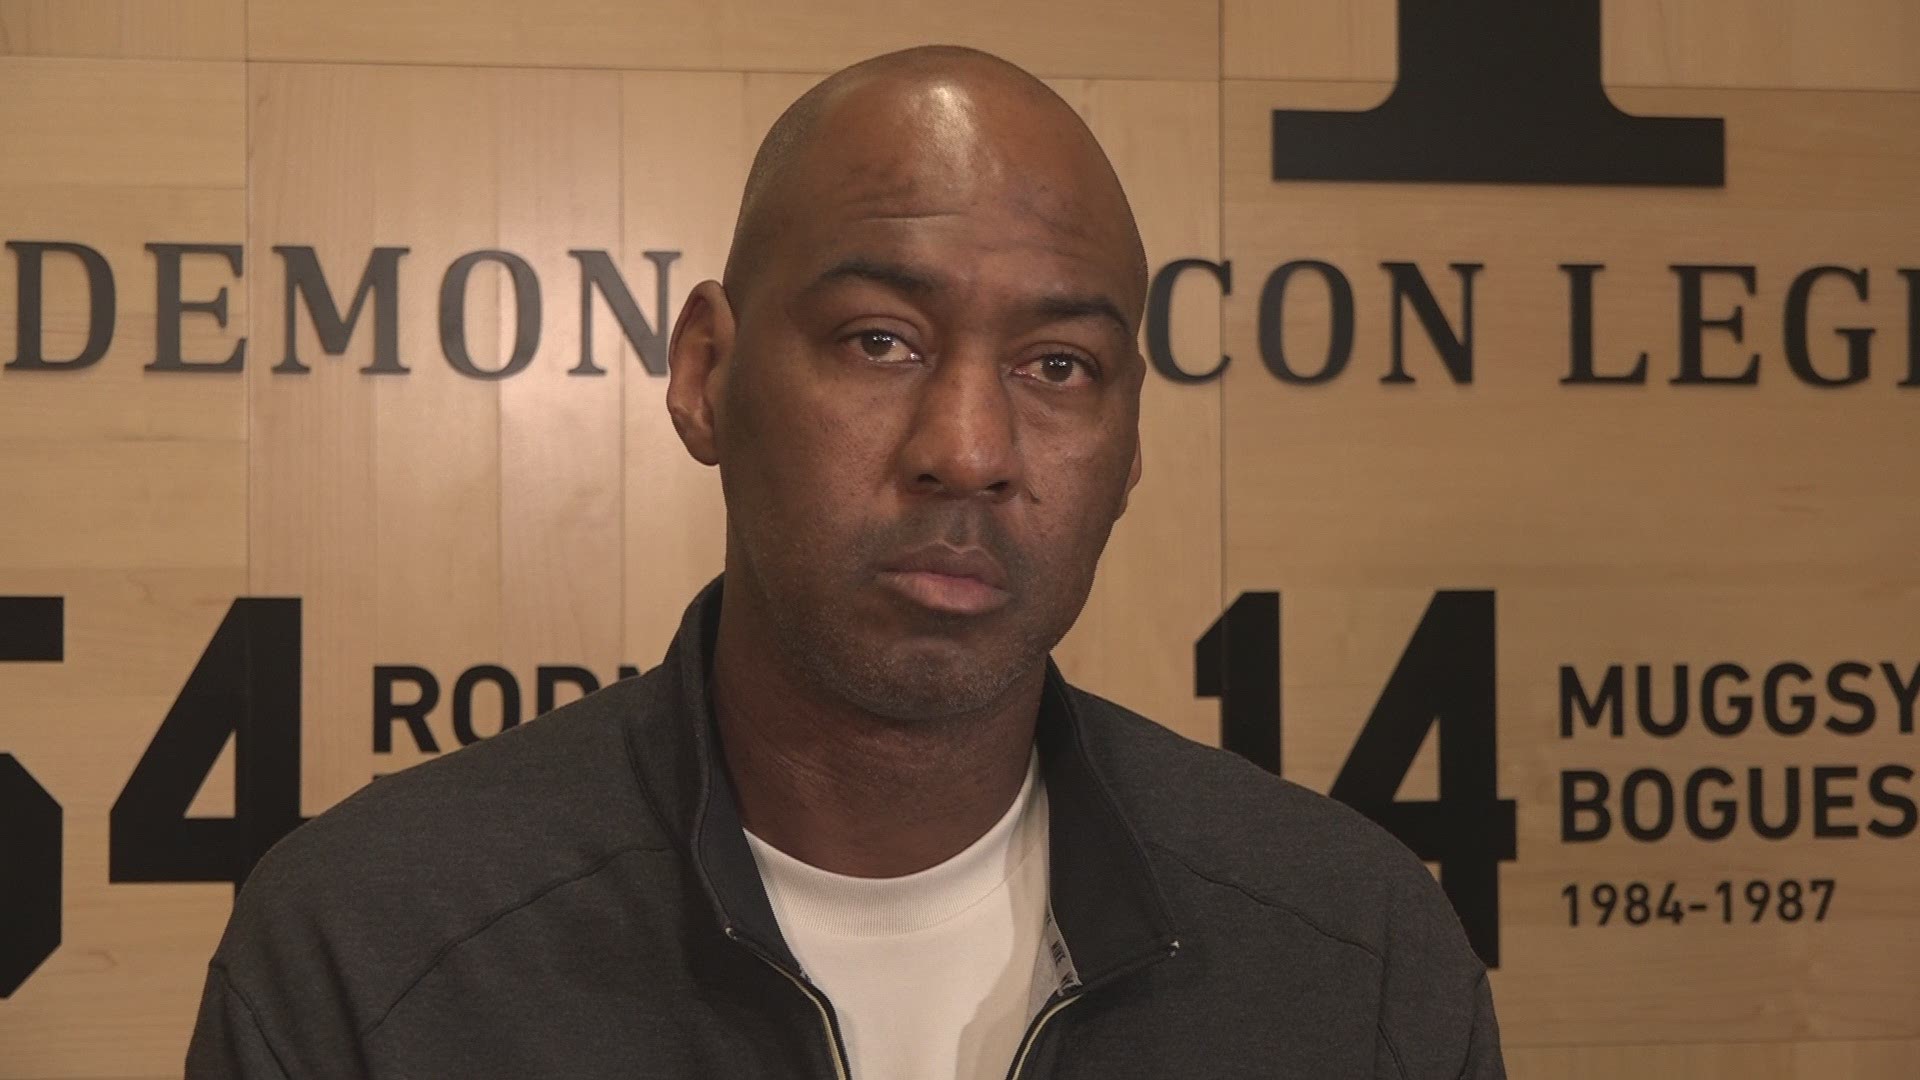 Coach Danny Manning remembers the man he played against in the NBA, and coach Jennifer Hoover reflects on his advocacy for the WNBA.